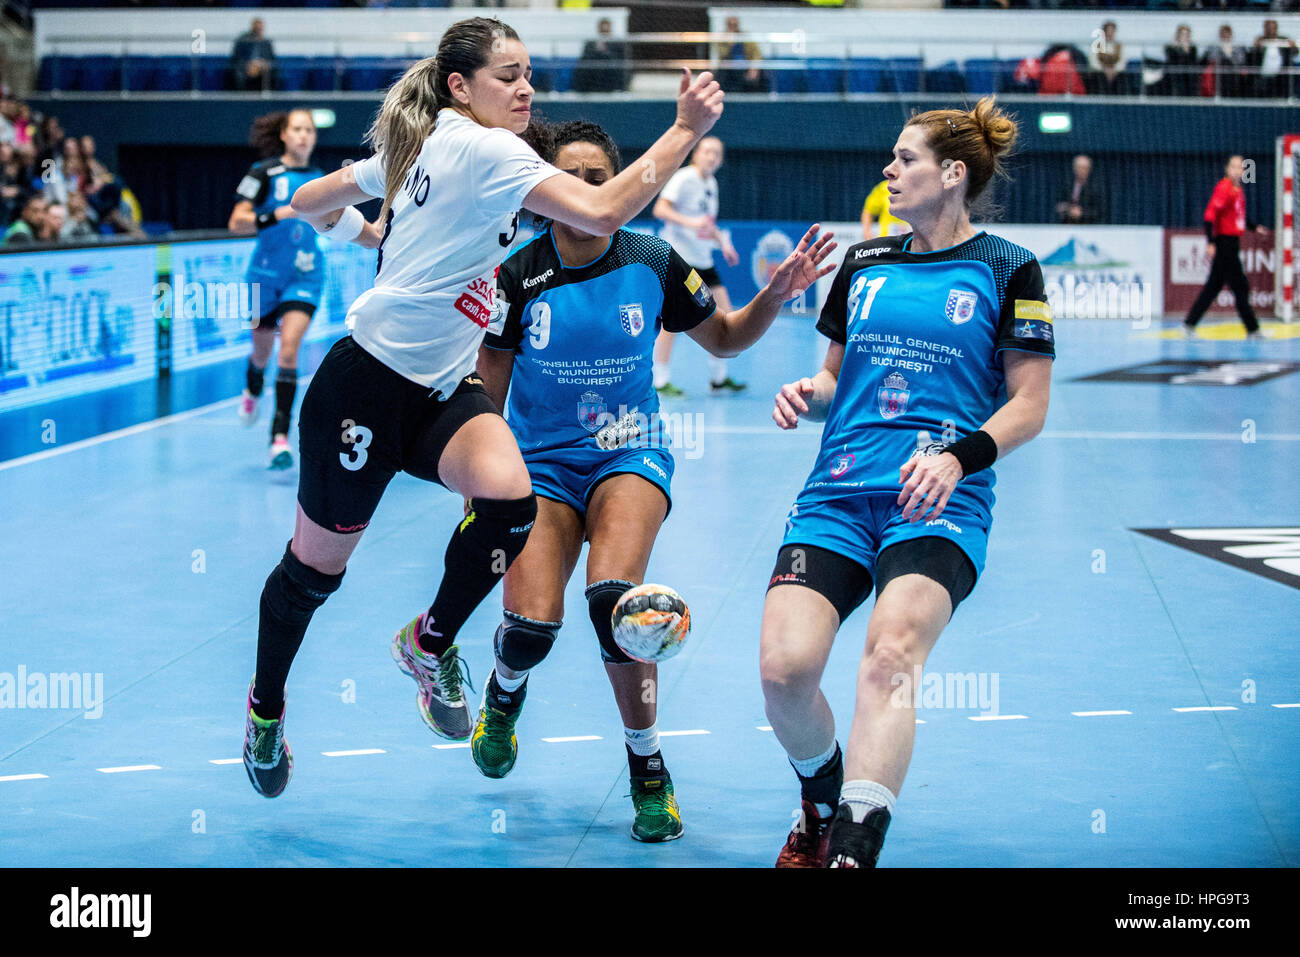 October 16, 2015: Jessica Da Silva Quintino #3 of MKS Selgros Lublin and Ana Paula Rodrigues Belo #9 of CSM Bucharest  in action during the Woman's European Handball Federation (EHF) Champions League game between  CSM Bucharest (ROU) vs MKS Selgros Lublin (POL) at Polyvalent Hall in Bucharest, Romania ROU.  Photo: Cronos/Catalin Soare Stock Photo